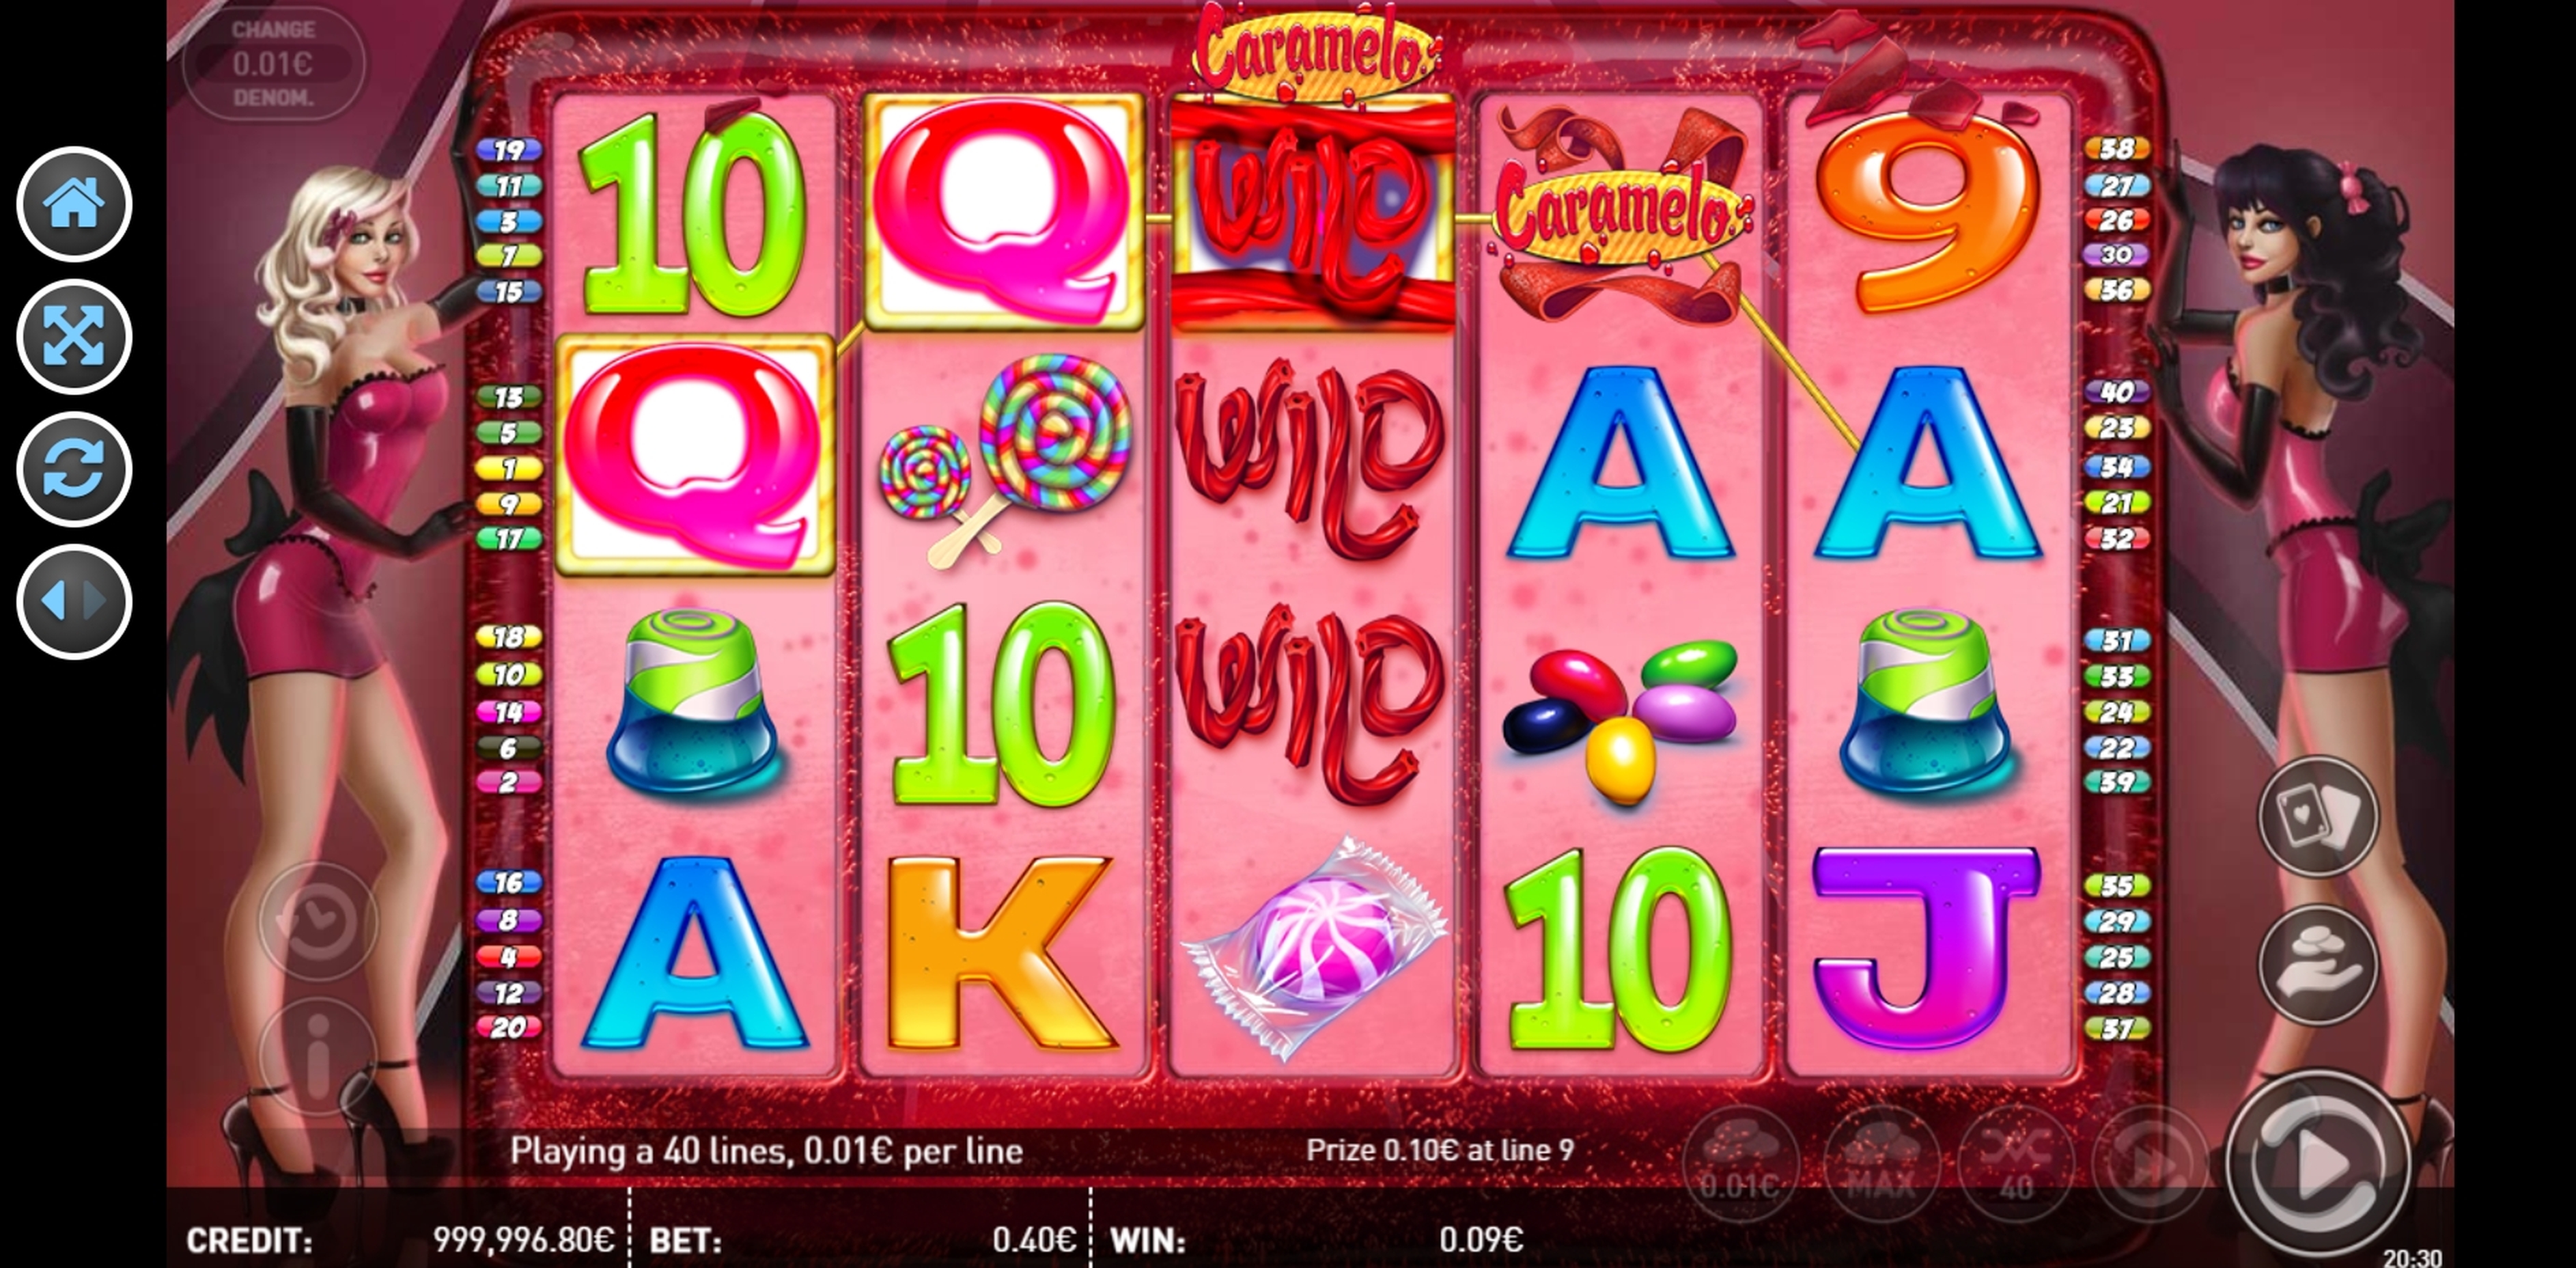 Win Money in Caramelo Free Slot Game by R. Franco